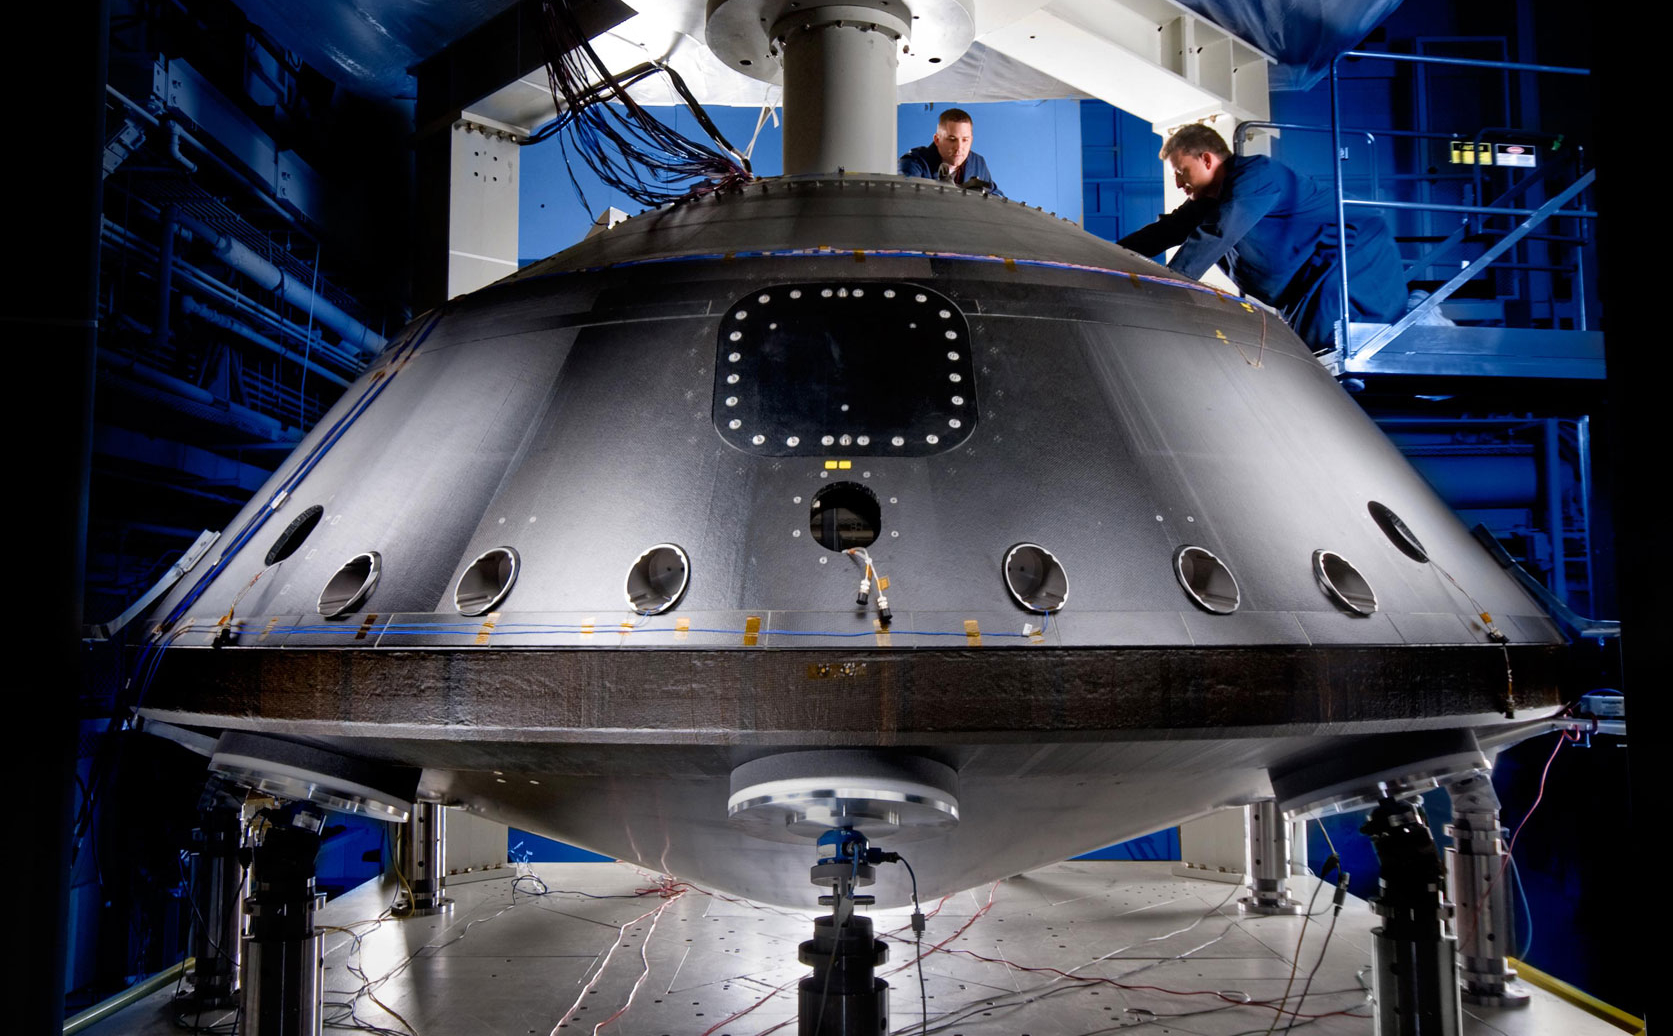 This image from July 2008 shows the aeroshell for NASA's Mars Science Laboratory while it was being worked on by spacecraft technicians at Lockheed Martin Space Systems Company near Denver.